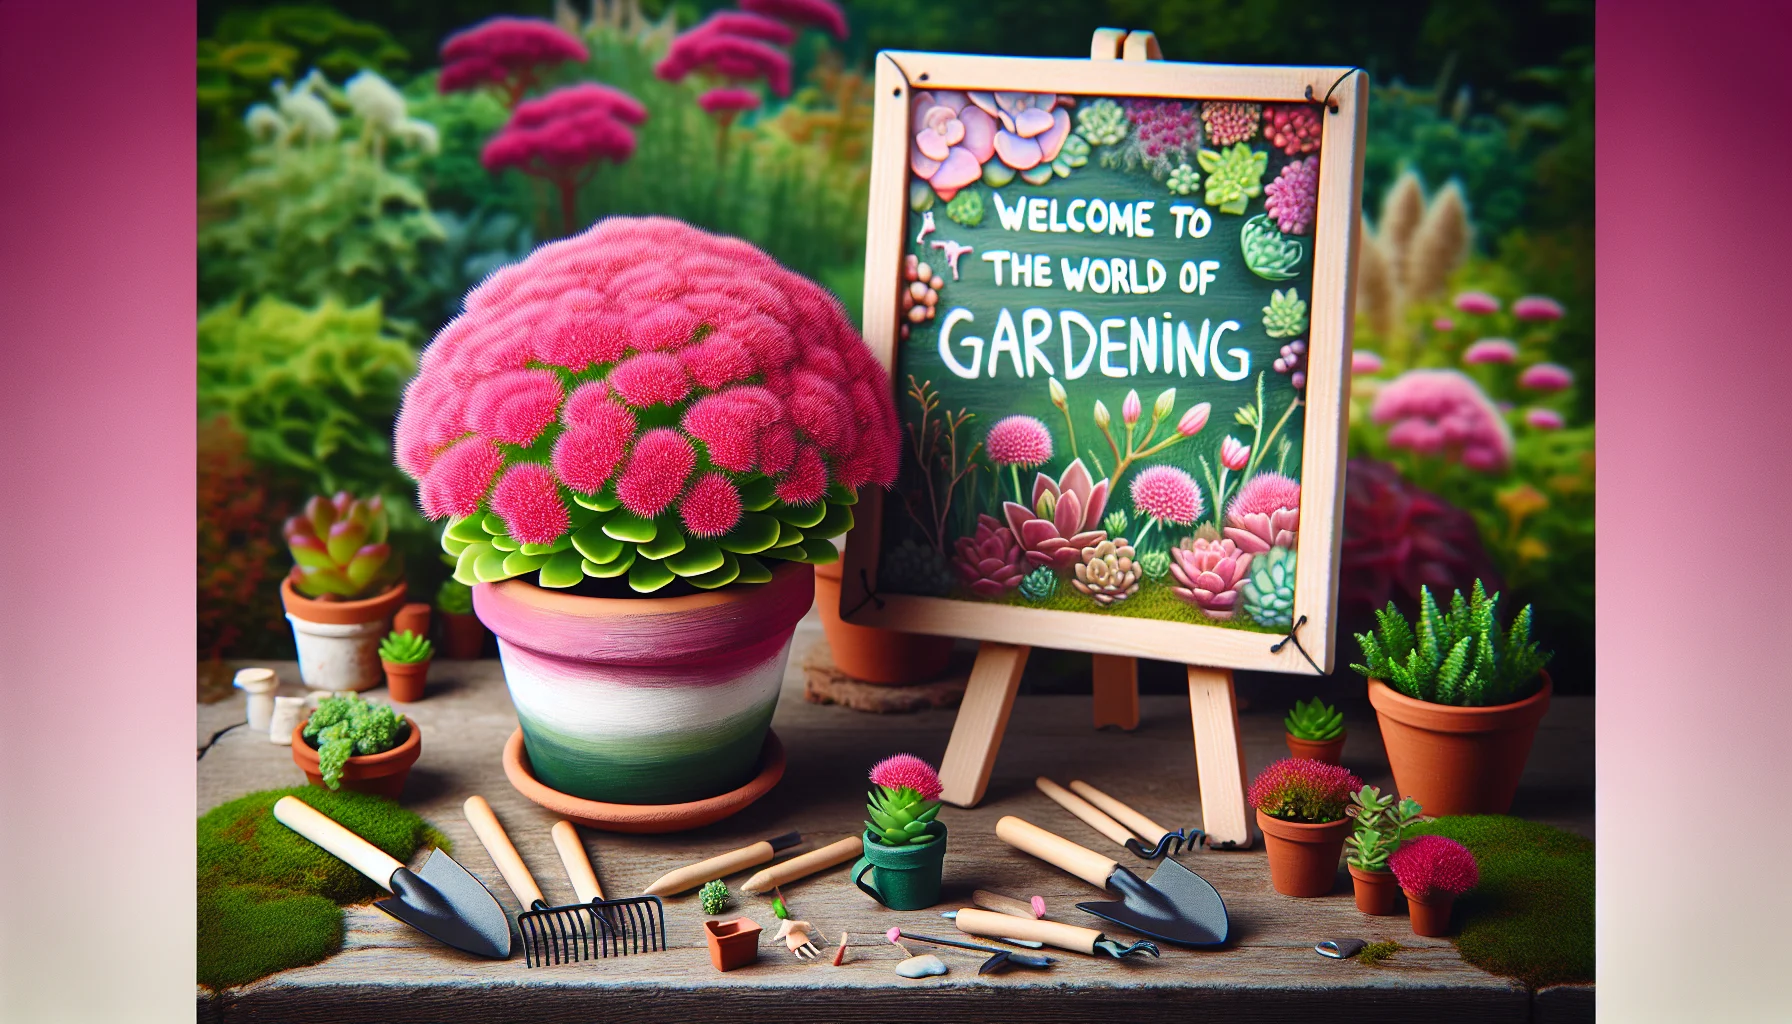 Create a highly detailed and realistic depiction of a vibrant pink sedum plant situated in an amusing gardening display. Picture the plant situated in a small painted clay pot with fun gardening tools like a miniature rake and shovel. Nearby, add an inviting wooden sign that says 'Welcome to the world of gardening', delightfully scribbled in a playful font. Include a backdrop of varied greenery and flourishing plants in the garden, suggesting a verdant and abundant horticultural environment. This joyful scene aims to encapsulate the excitement and passion that gardening can inspire.